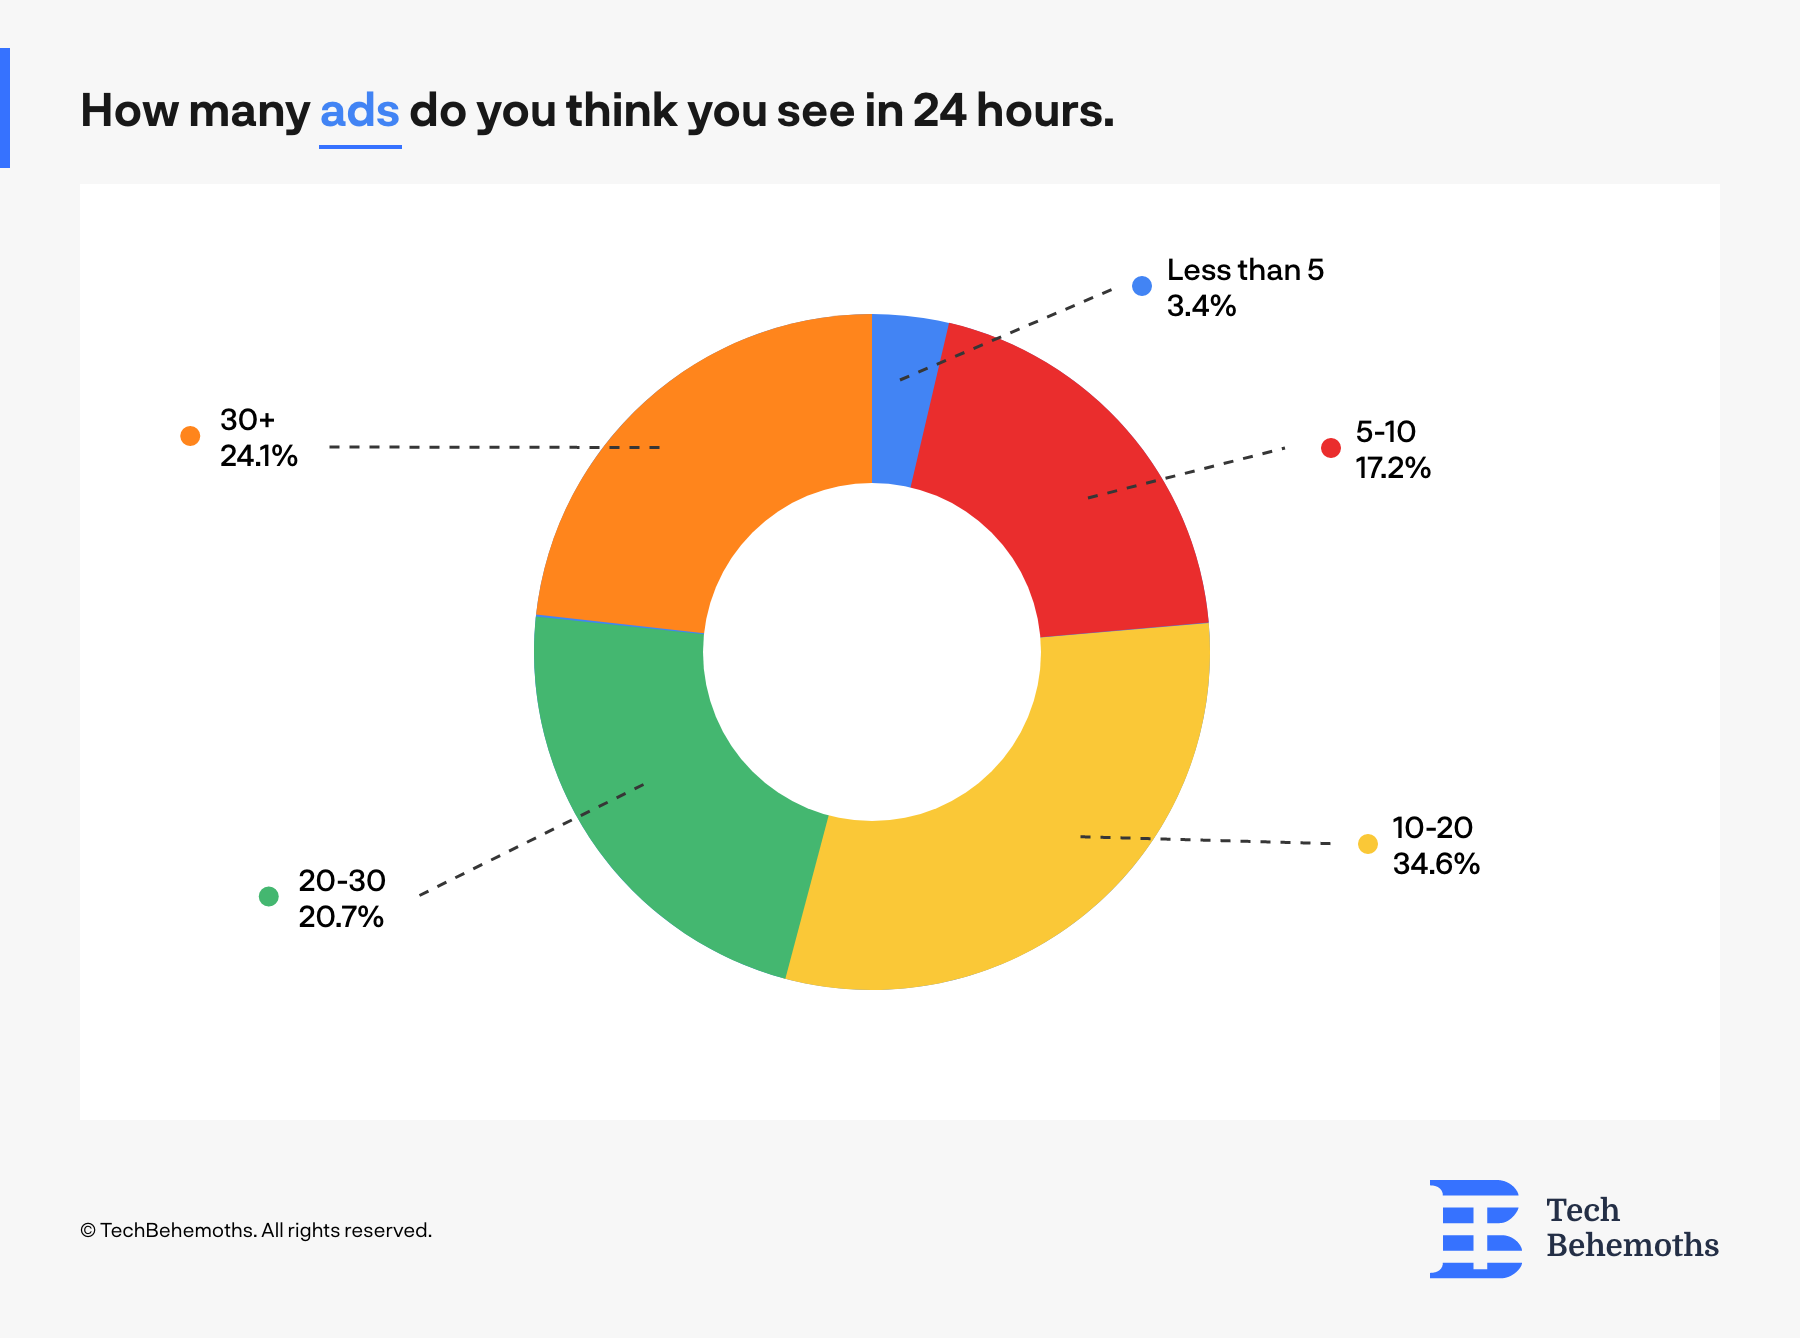 How many ads consumers see per day